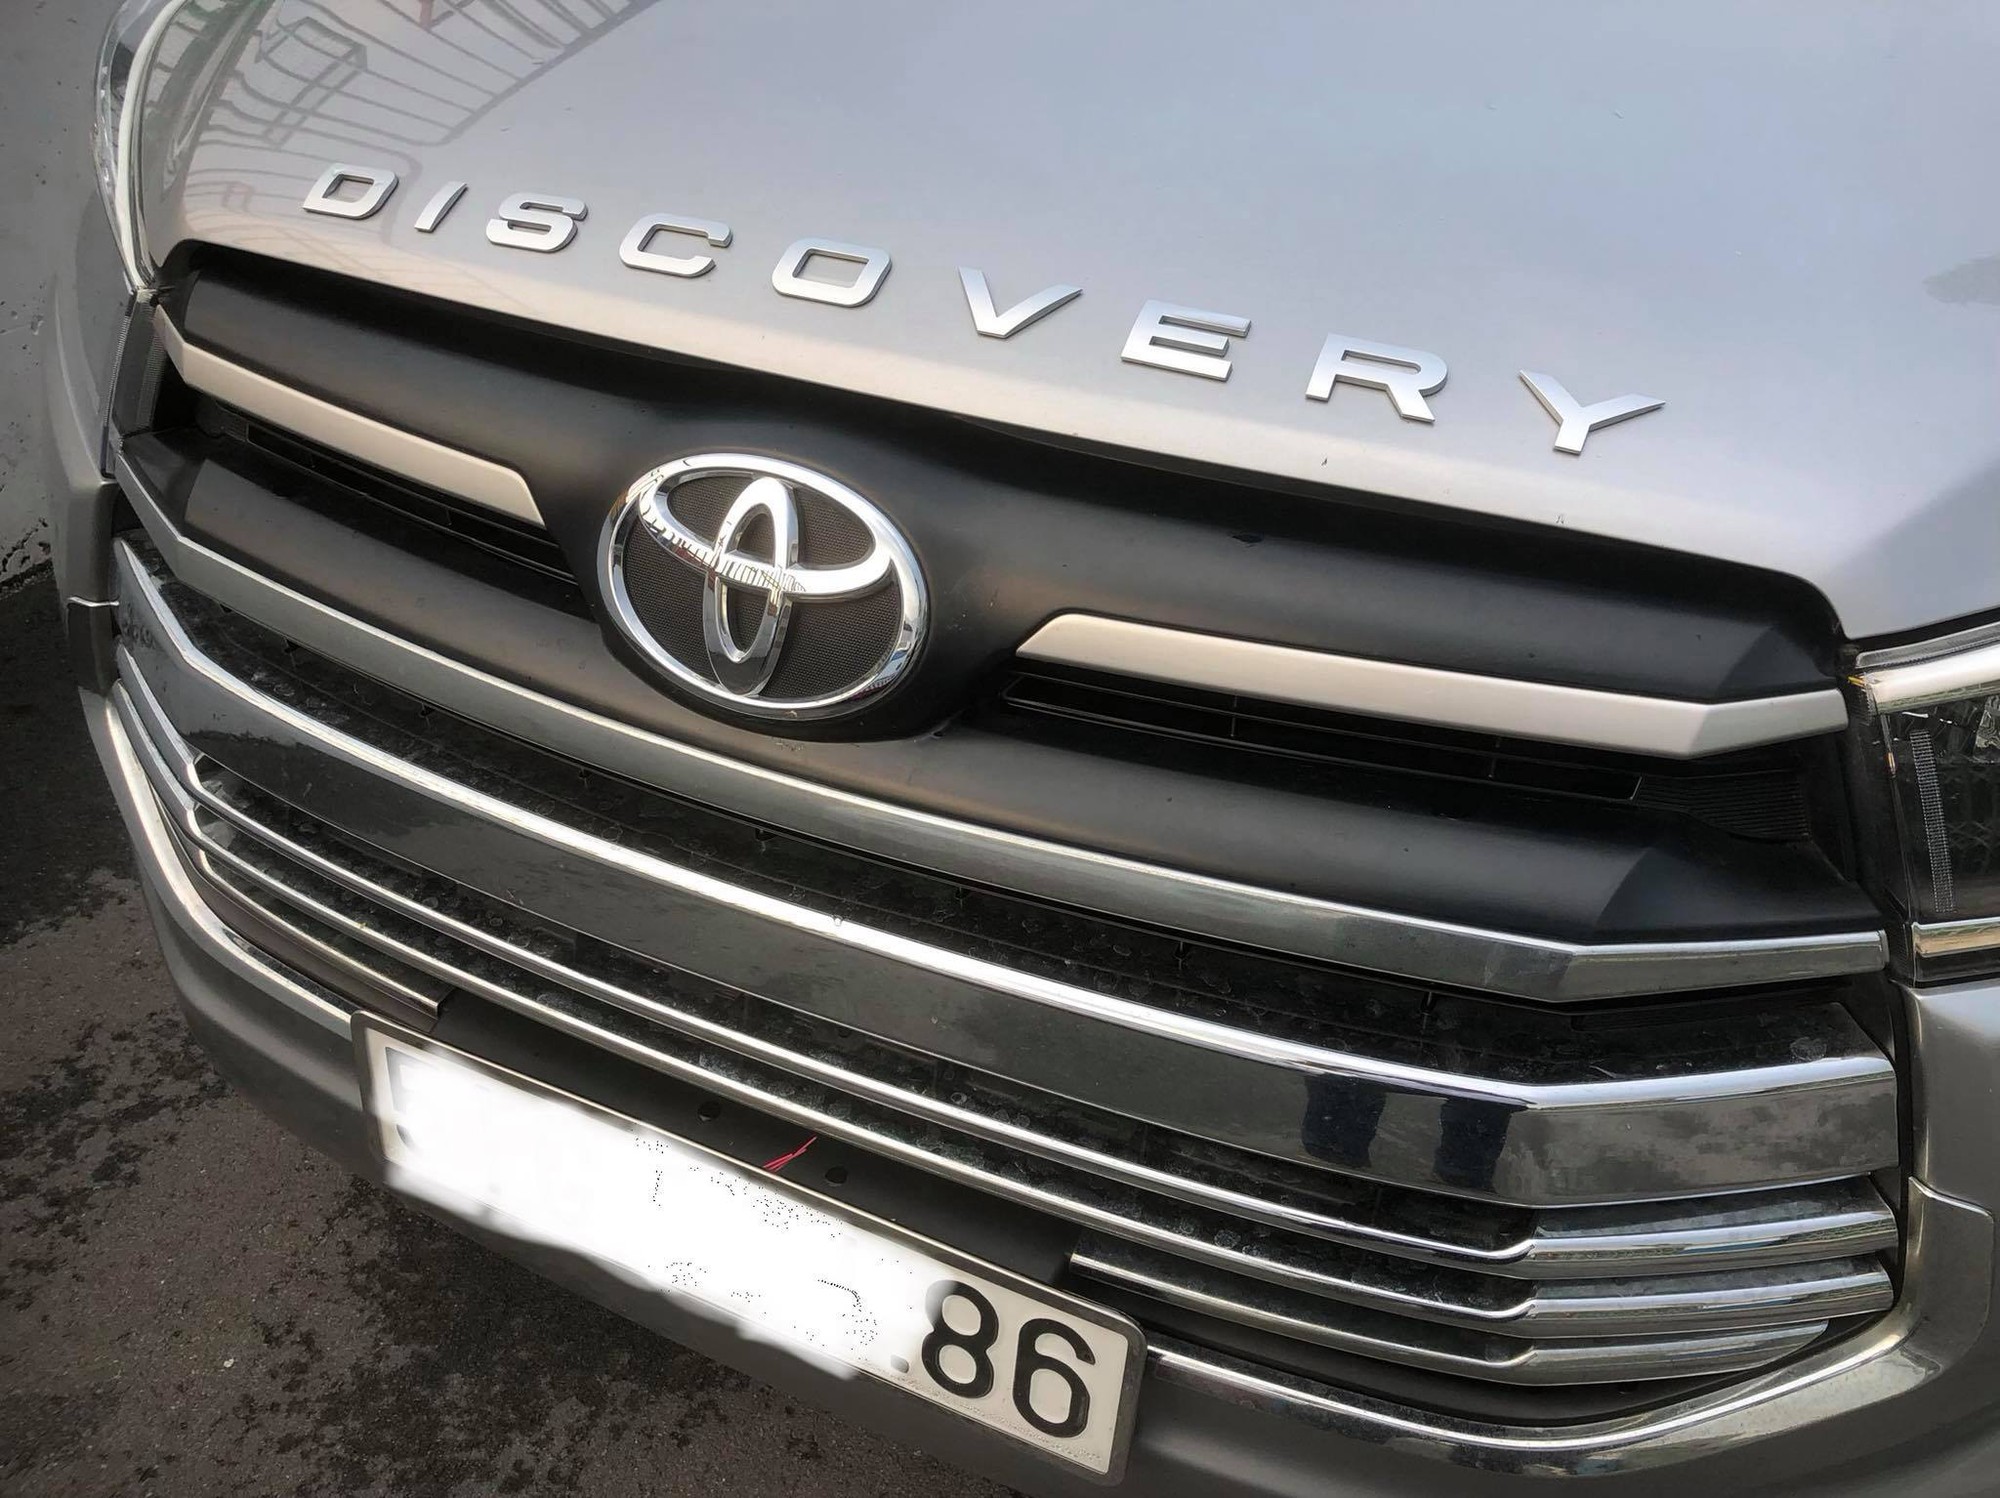 discovery, landrover, discovery việt nam